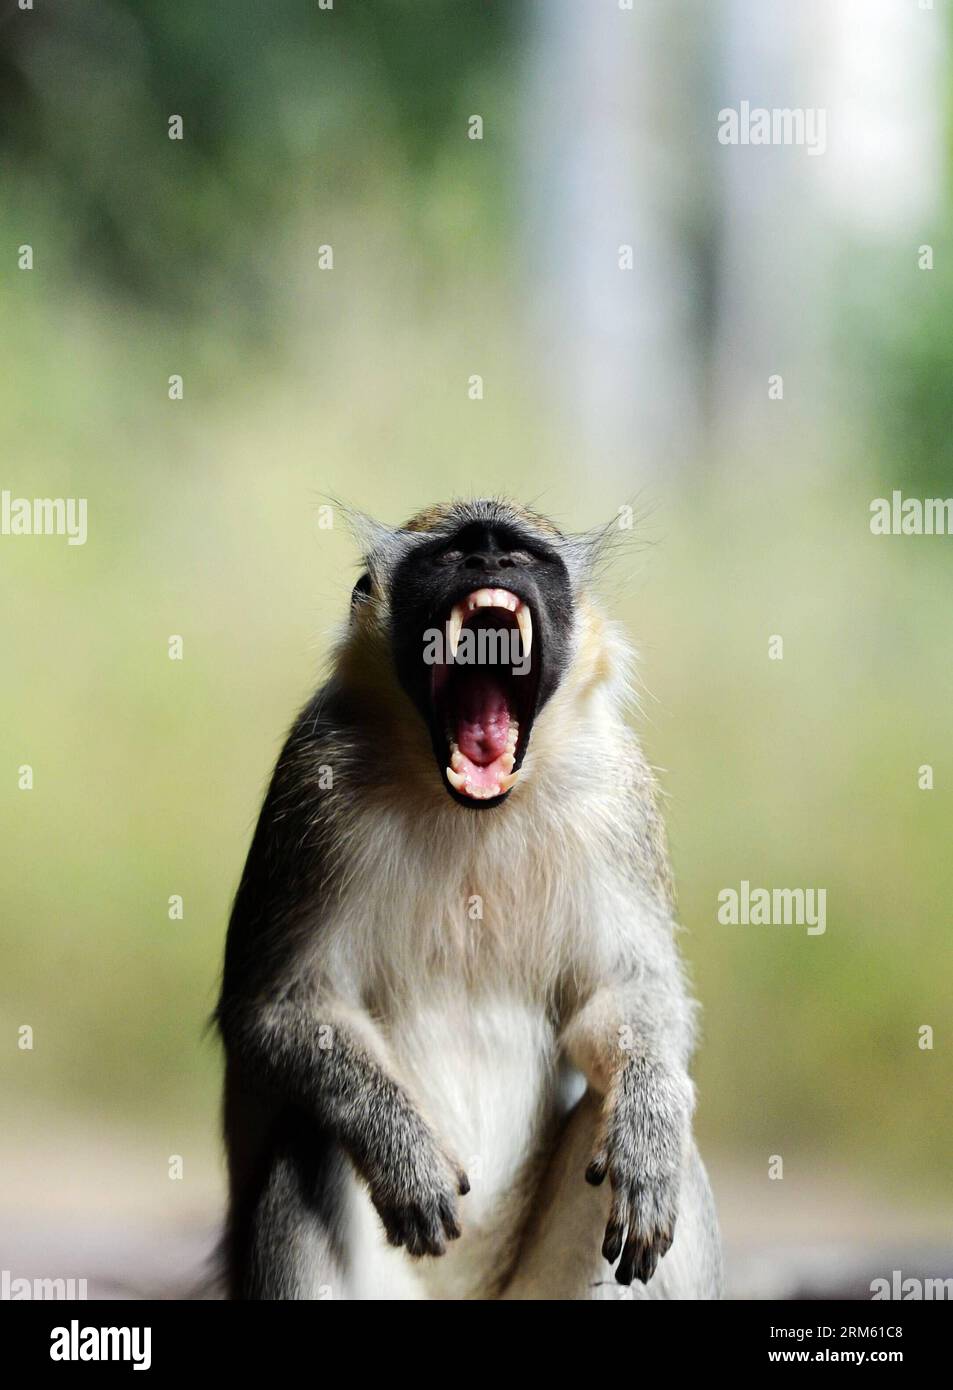 Bildnummer: 60761534  Datum: 15.11.2013  Copyright: imago/Xinhua     Nov., 2013 -  A monkey yawns in Niokolo-Koba National Park, Senegal, on Nov. 15, 2013. Located in a well-watered area along the banks of the Gambia river, the gallery forests and savannahs of Niokolo-Koba National Park have a very rich fauna,  . (Xinhua/Wu Xiaoling)(bxq) SENEGAL-WORLD HERITAGE-NIOKOLO-KOBA NATIONAL PARK PUBLICATIONxNOTxINxCHN Gesellschaft x2x xkg 2013 hoch o0 Tiere Affe Maul kurios Zähne Meerkatze Grünmeerkatze Stock Photo